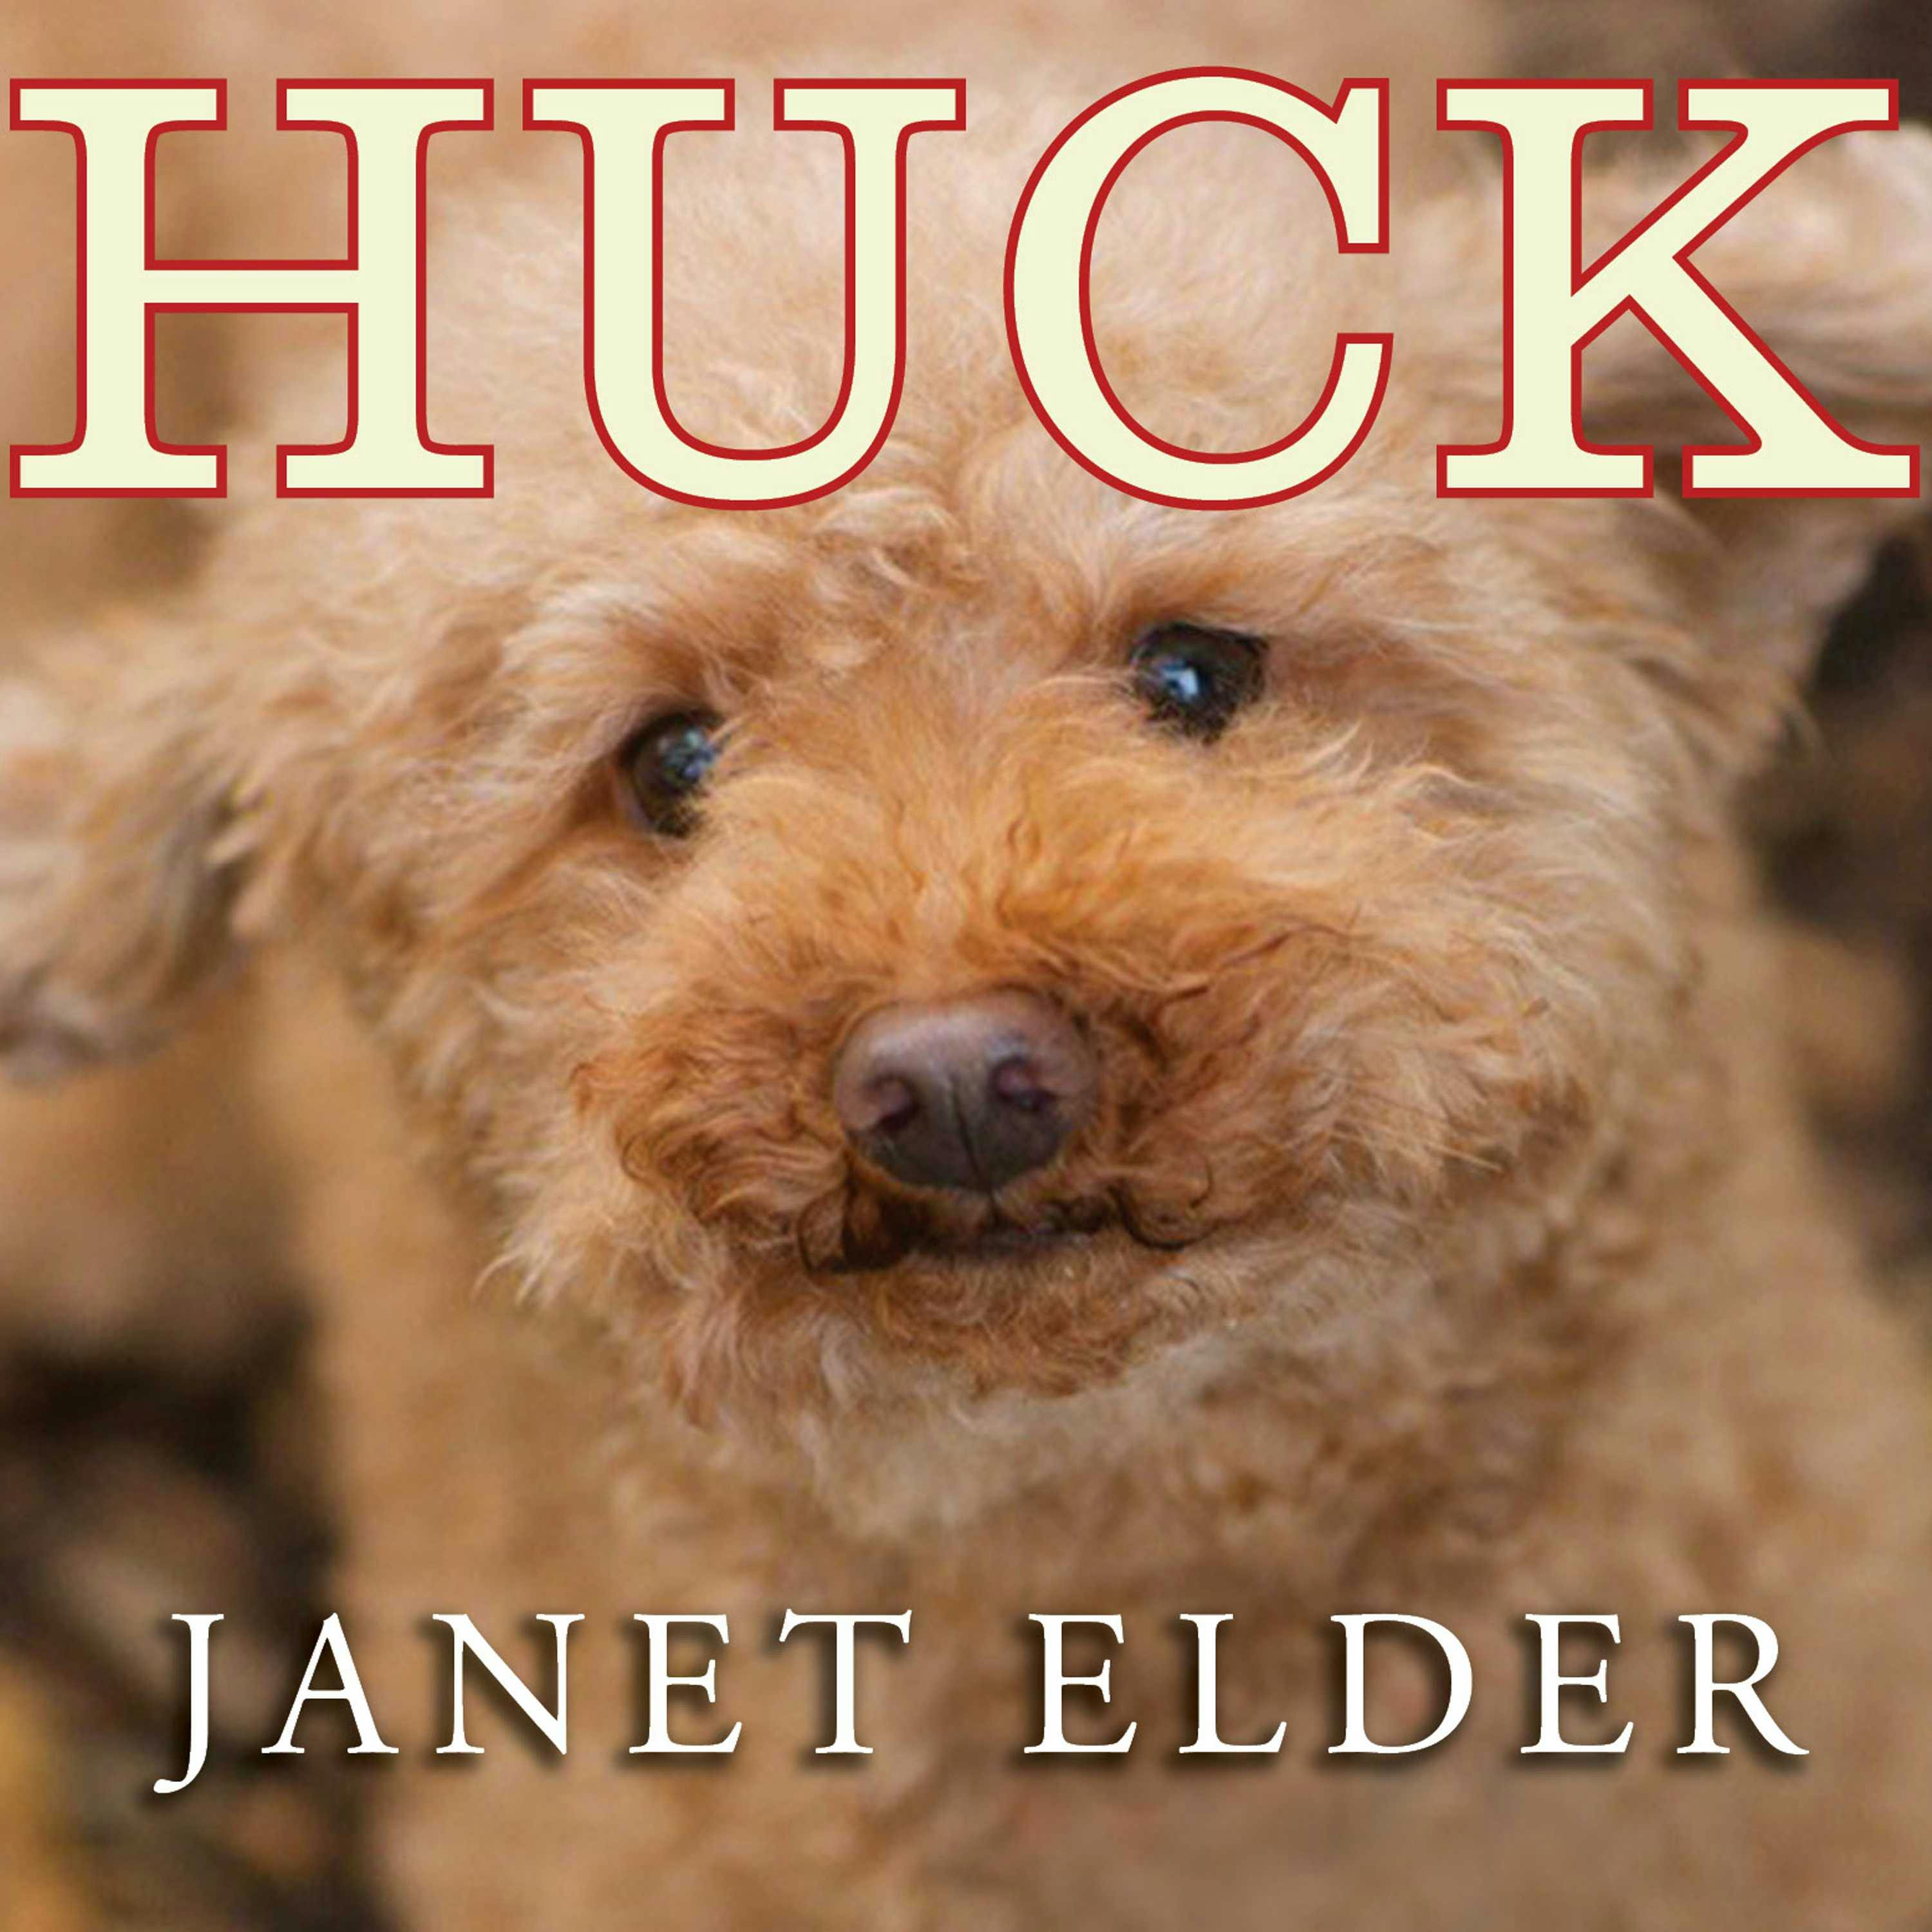 Huck: The Remarkable True Story of How One Lost Puppy Taught a Family---and a Whole Town---about Hope and Happy Endings - Janet Elder